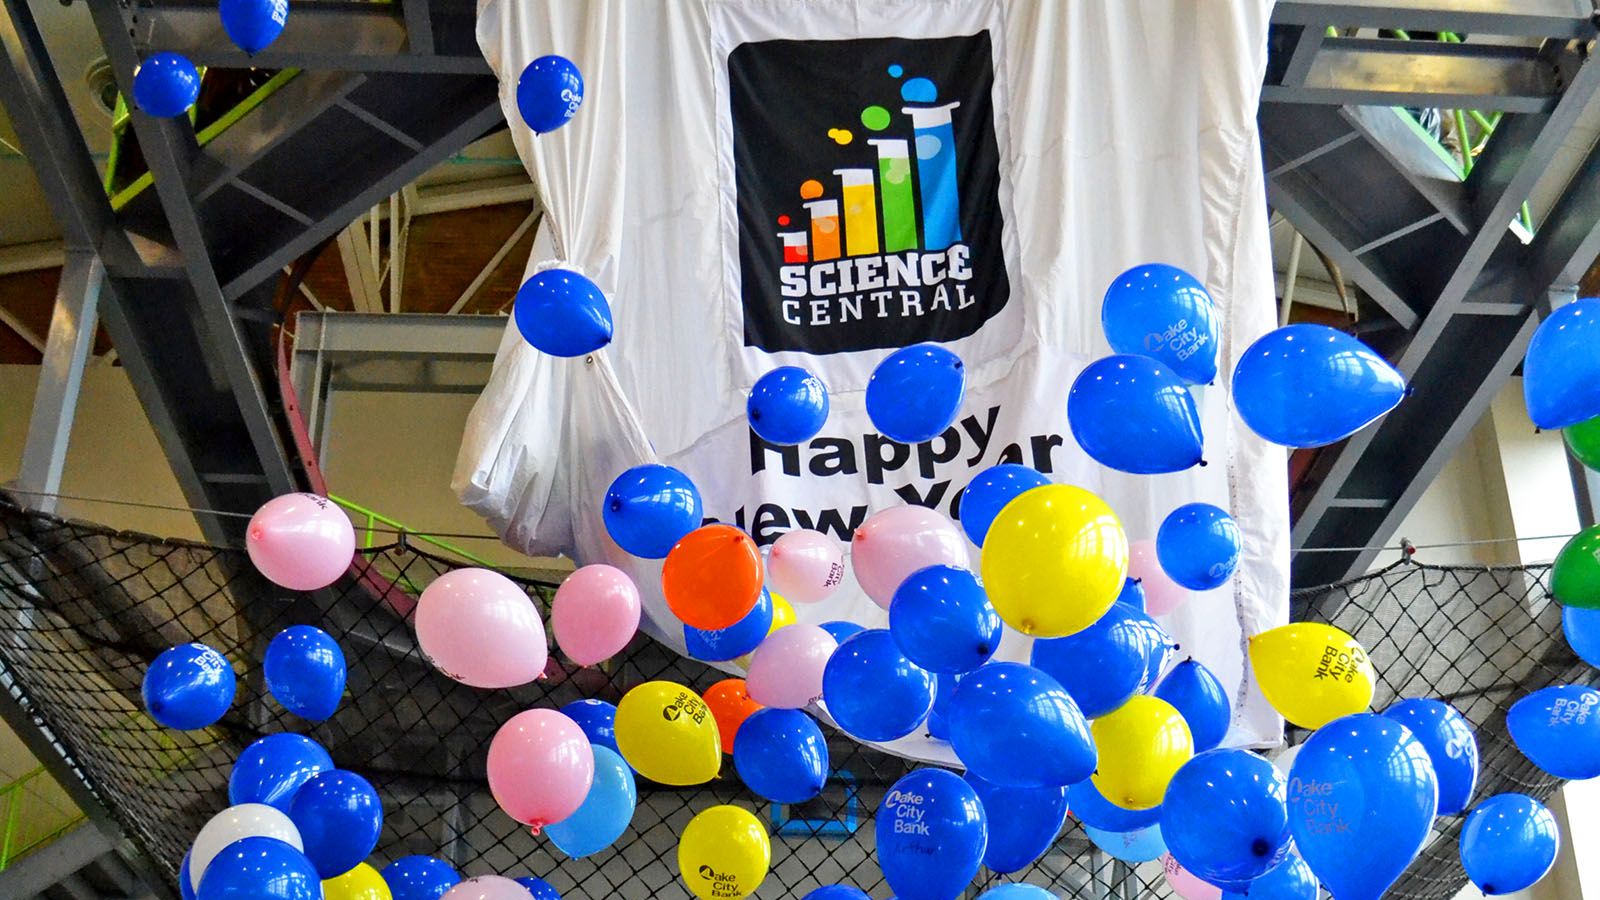 Science Central will mark the New Year with a balloon drop at noon and 2 p.m. on Sunday, Dec. 31.